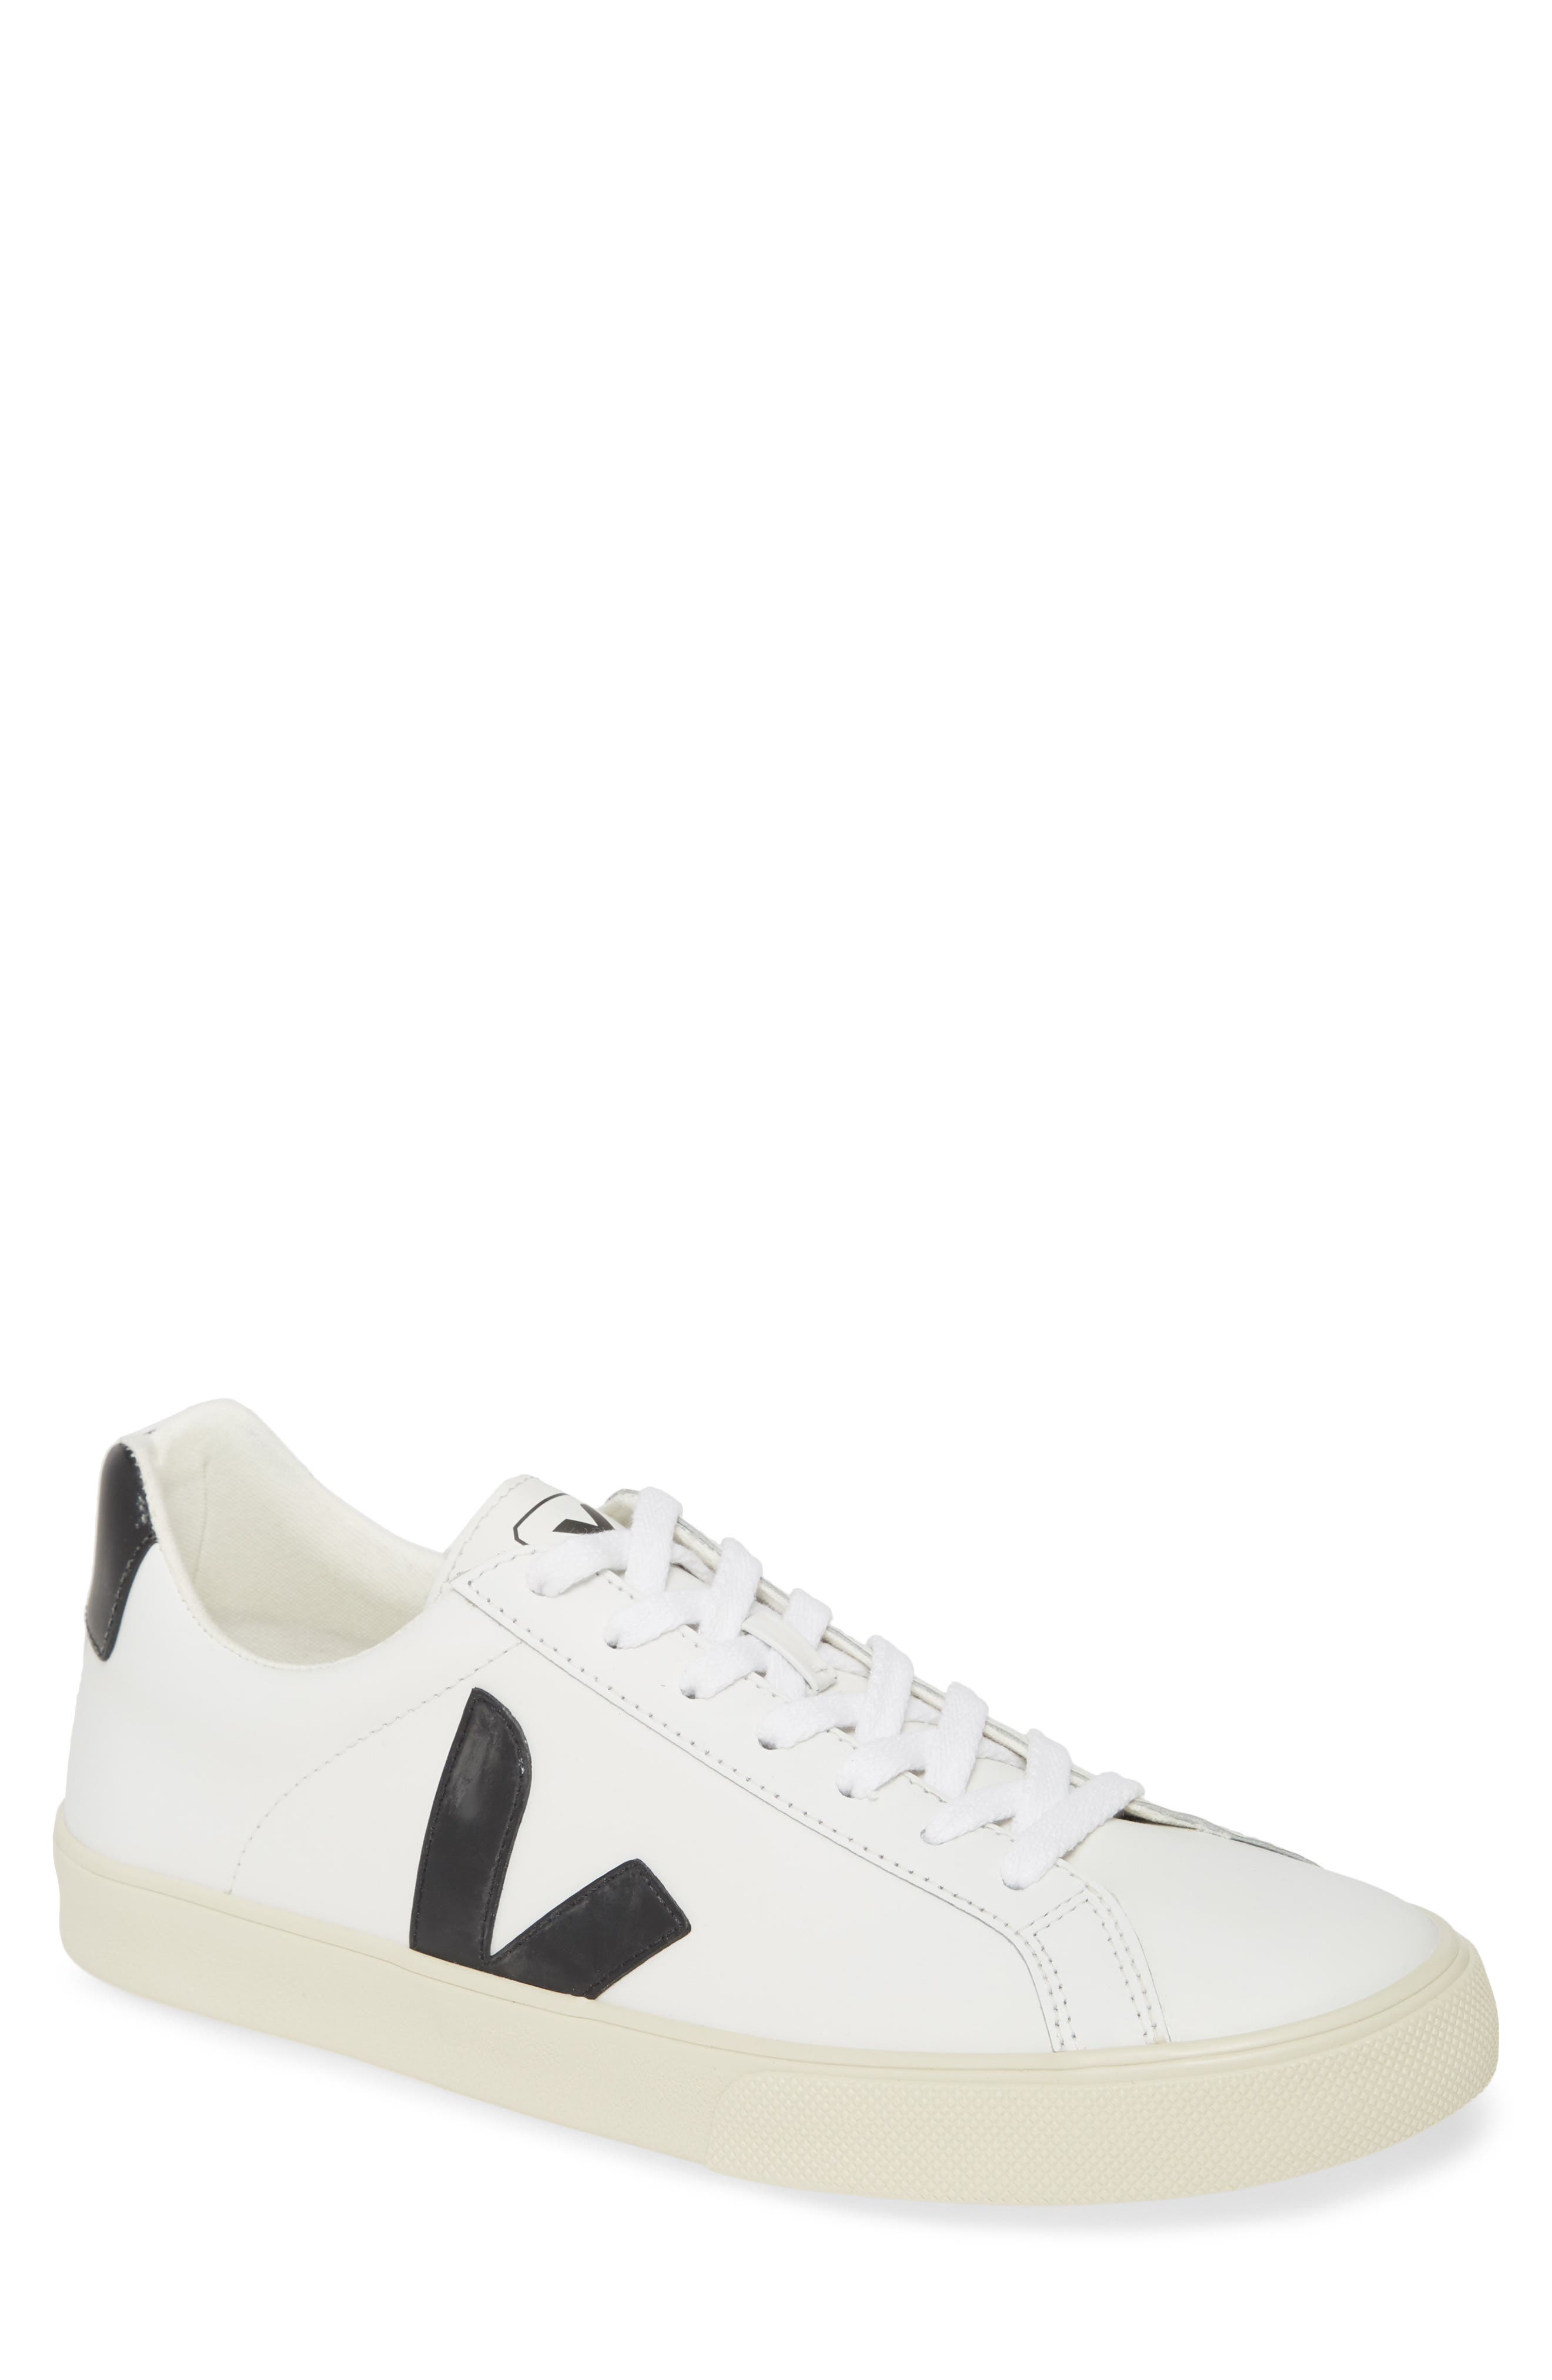 white tennis shoes nordstrom